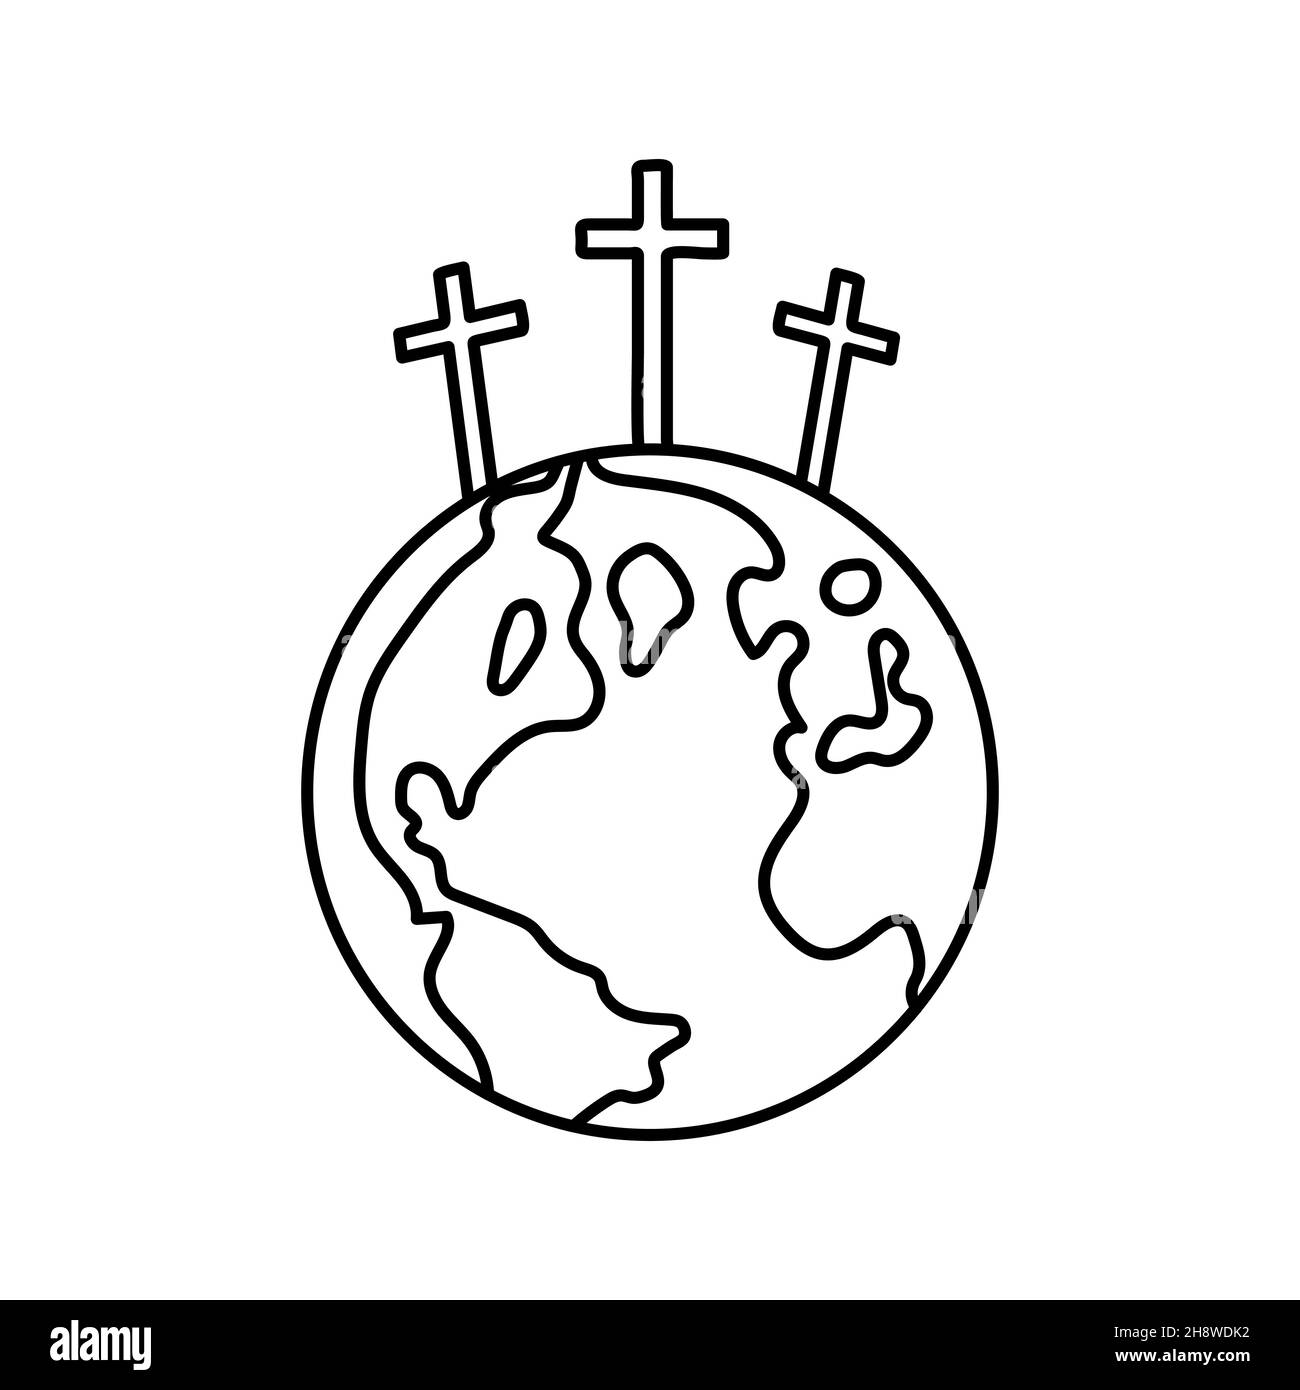 Earth globe icon with crucifixion of Jesus. Calvary icon. Abstract religious logo. Christian cross icon. Vector illustration. Linear symbol of church Stock Vector